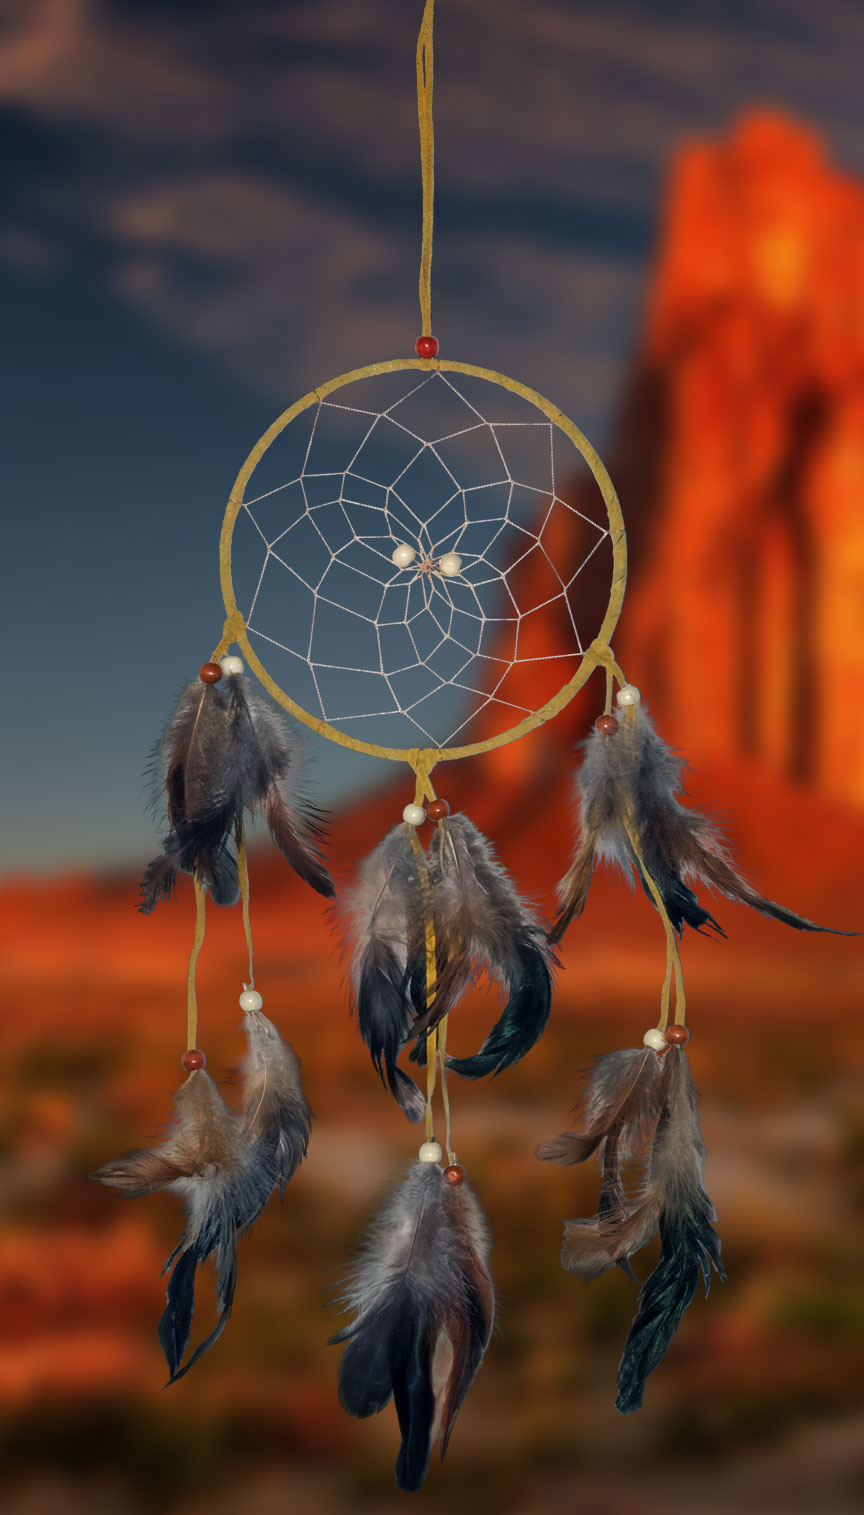 Shows an image of dreamcatcher owg013 on a scenic background